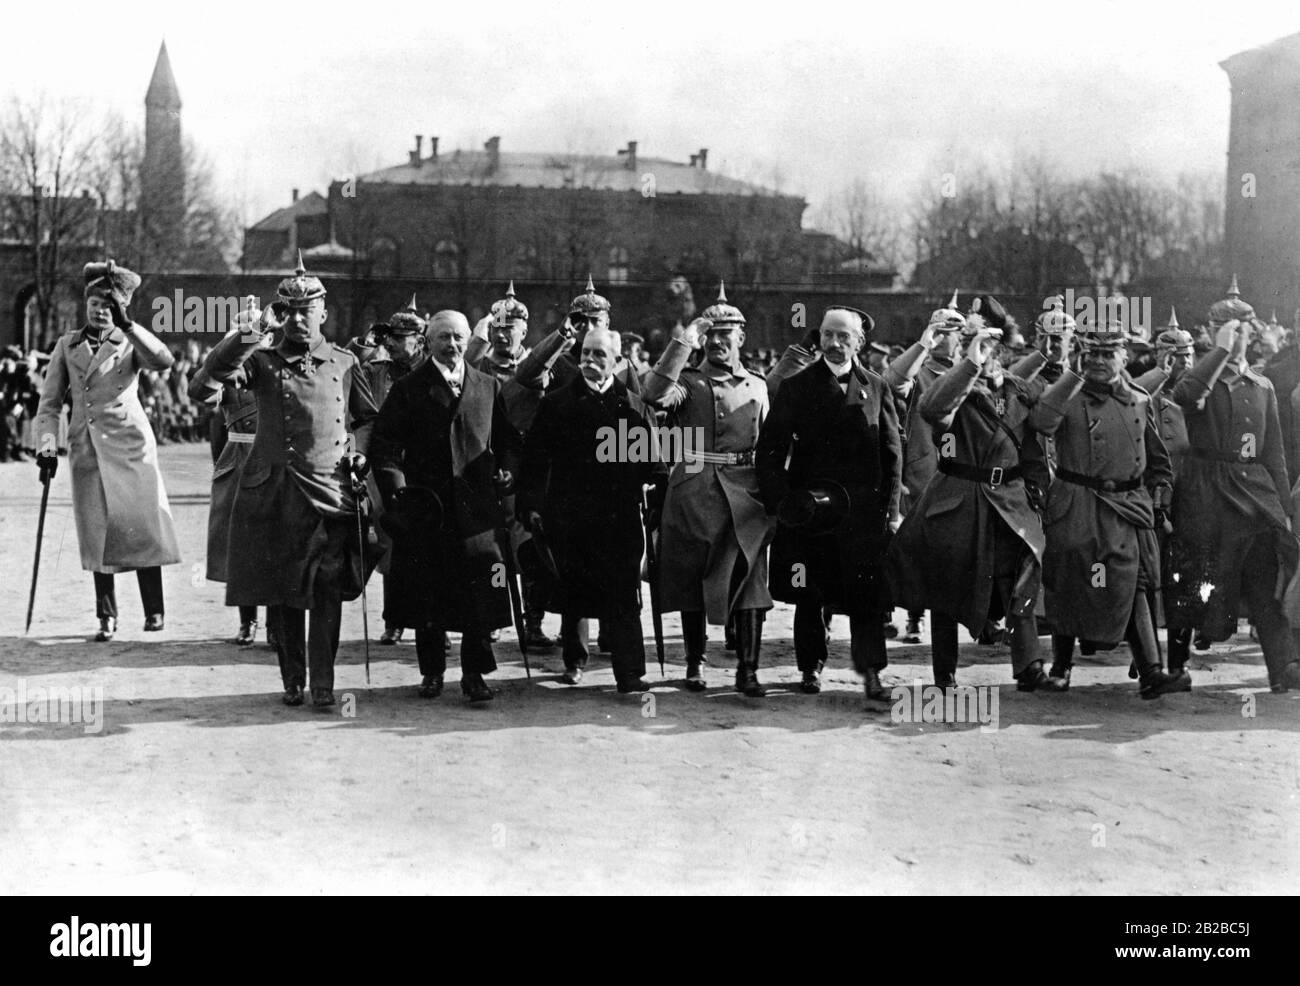 By order of the Allied victorious powers, all cadet establishments in the German Reich must be dissolved. The picture shows the farewell parade of the former cadets in Berlin-Lichterfelde in the courtyard of the Prussian Hauptkadettenanstalt (main cadet school). Second from left, General Erich Ludendorff. Stock Photo